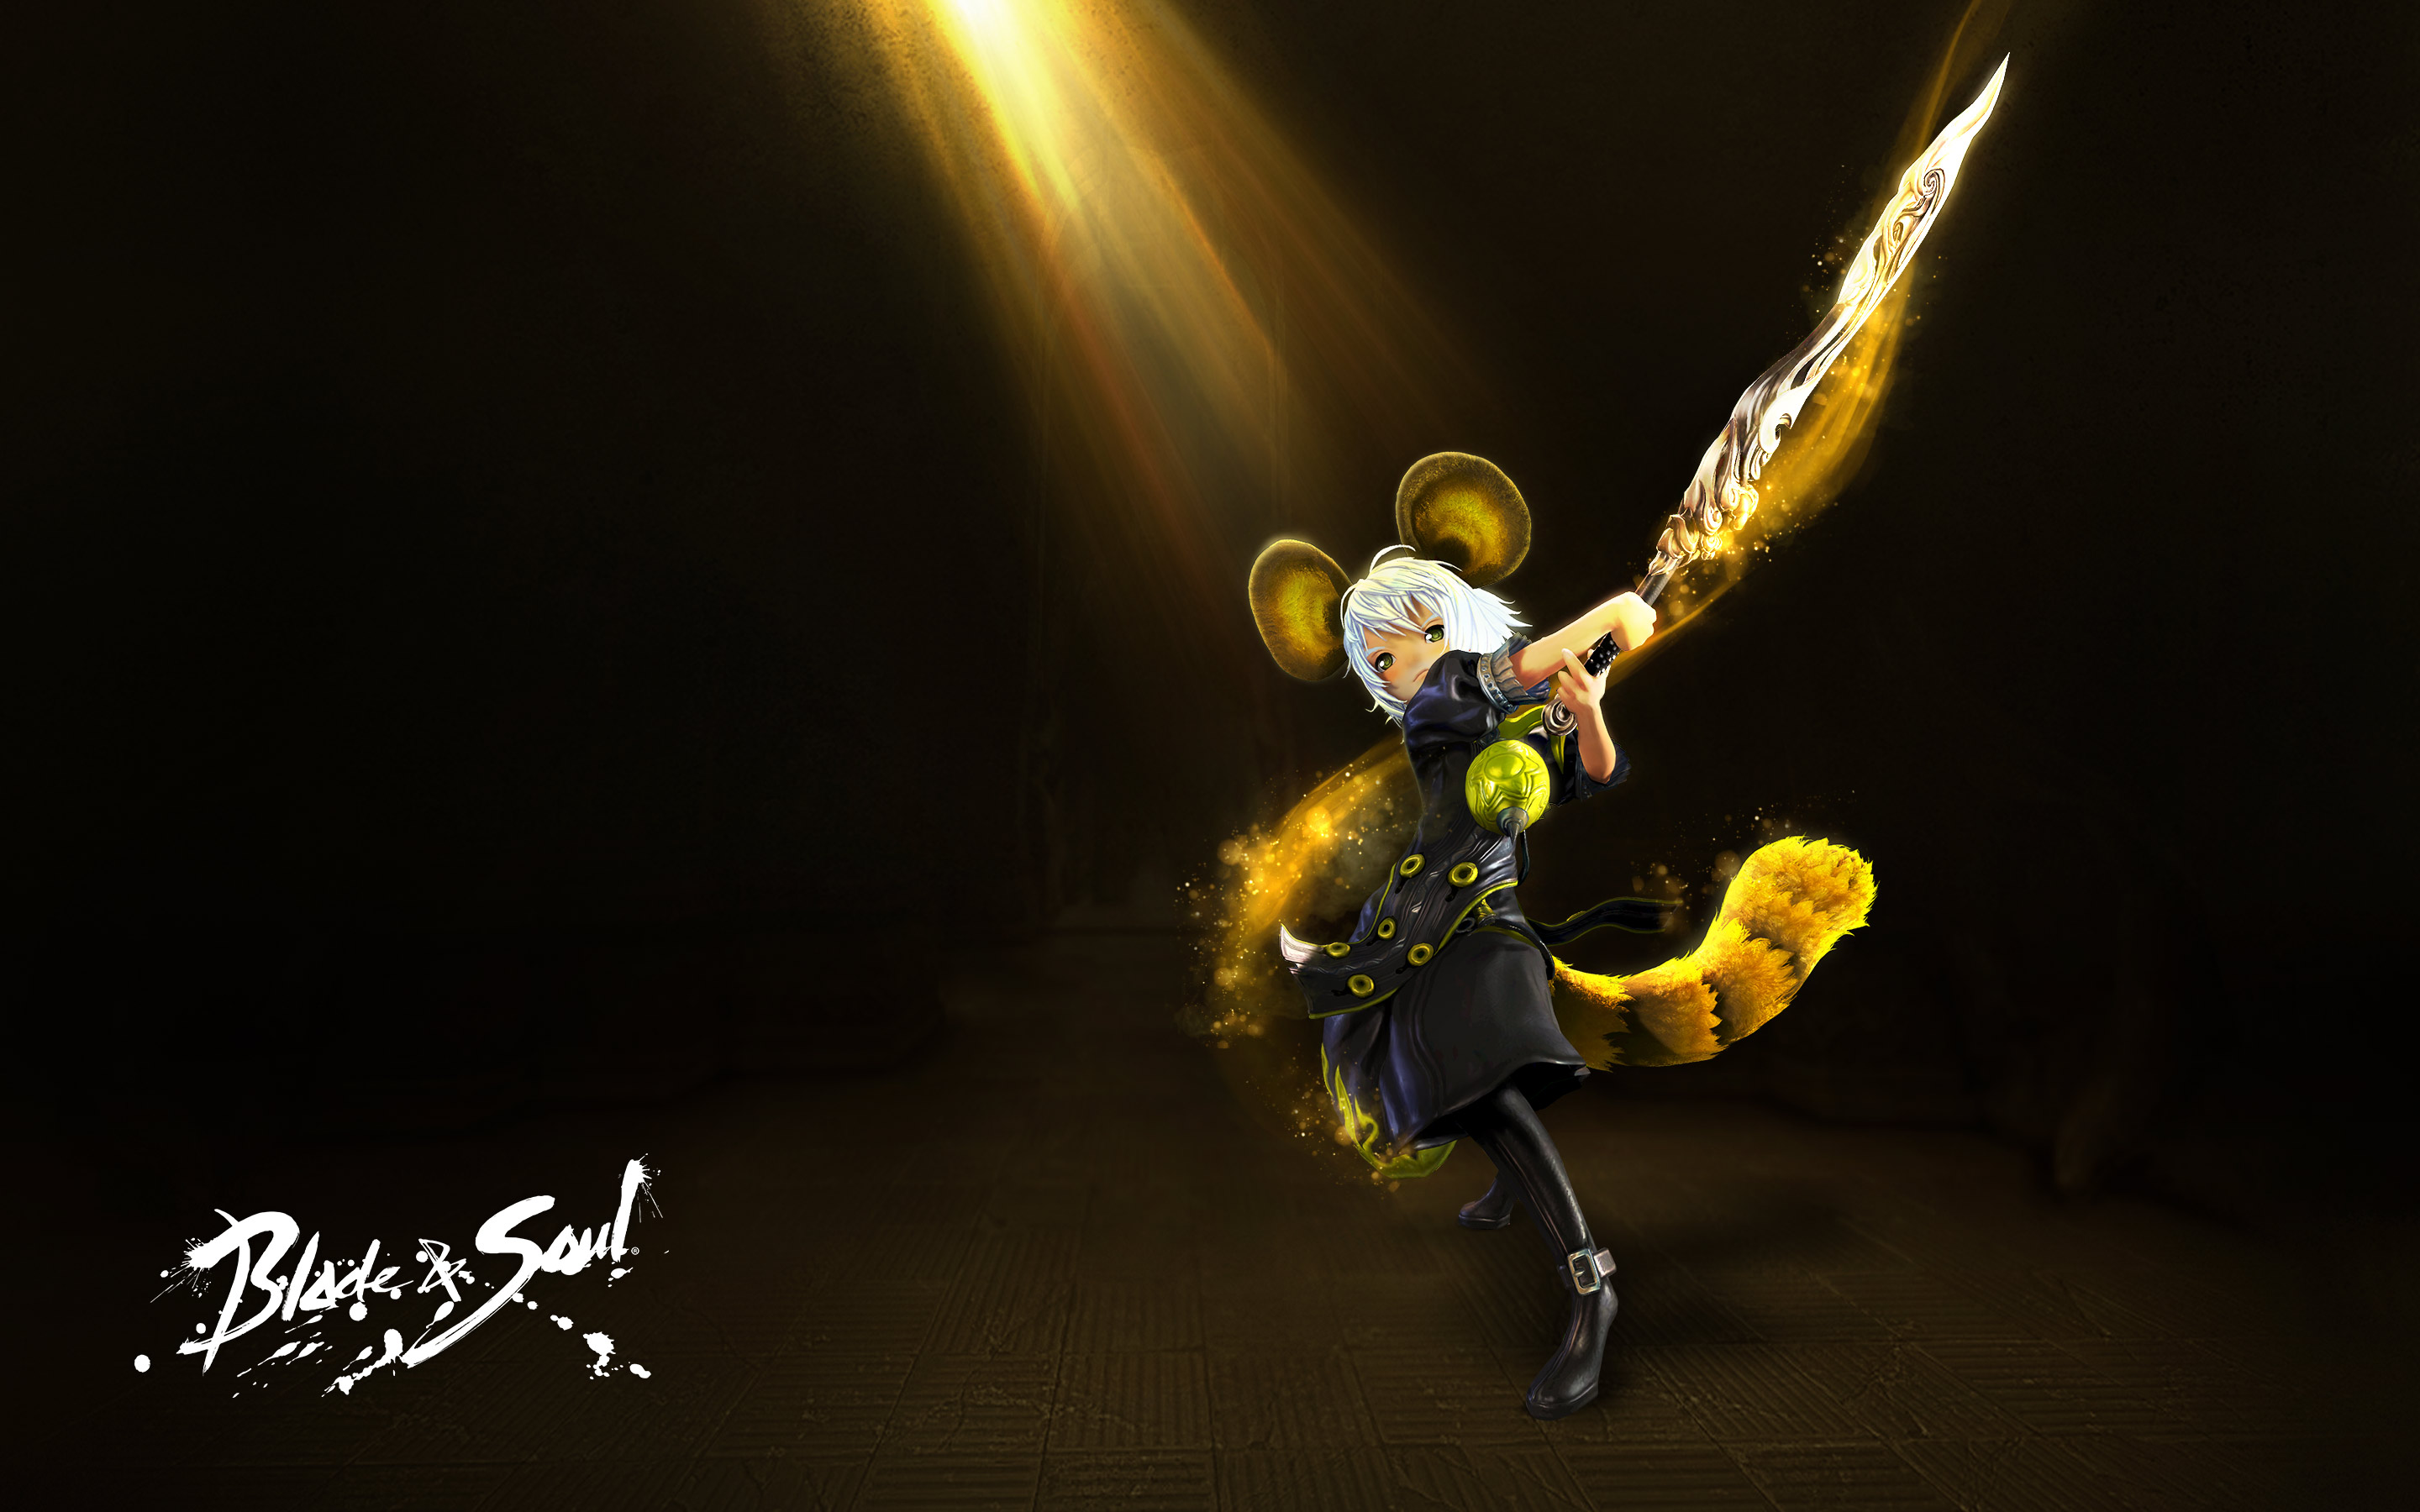 General 2880x1800 Blade & Soul bns mouse ears video games anime girls anime sword